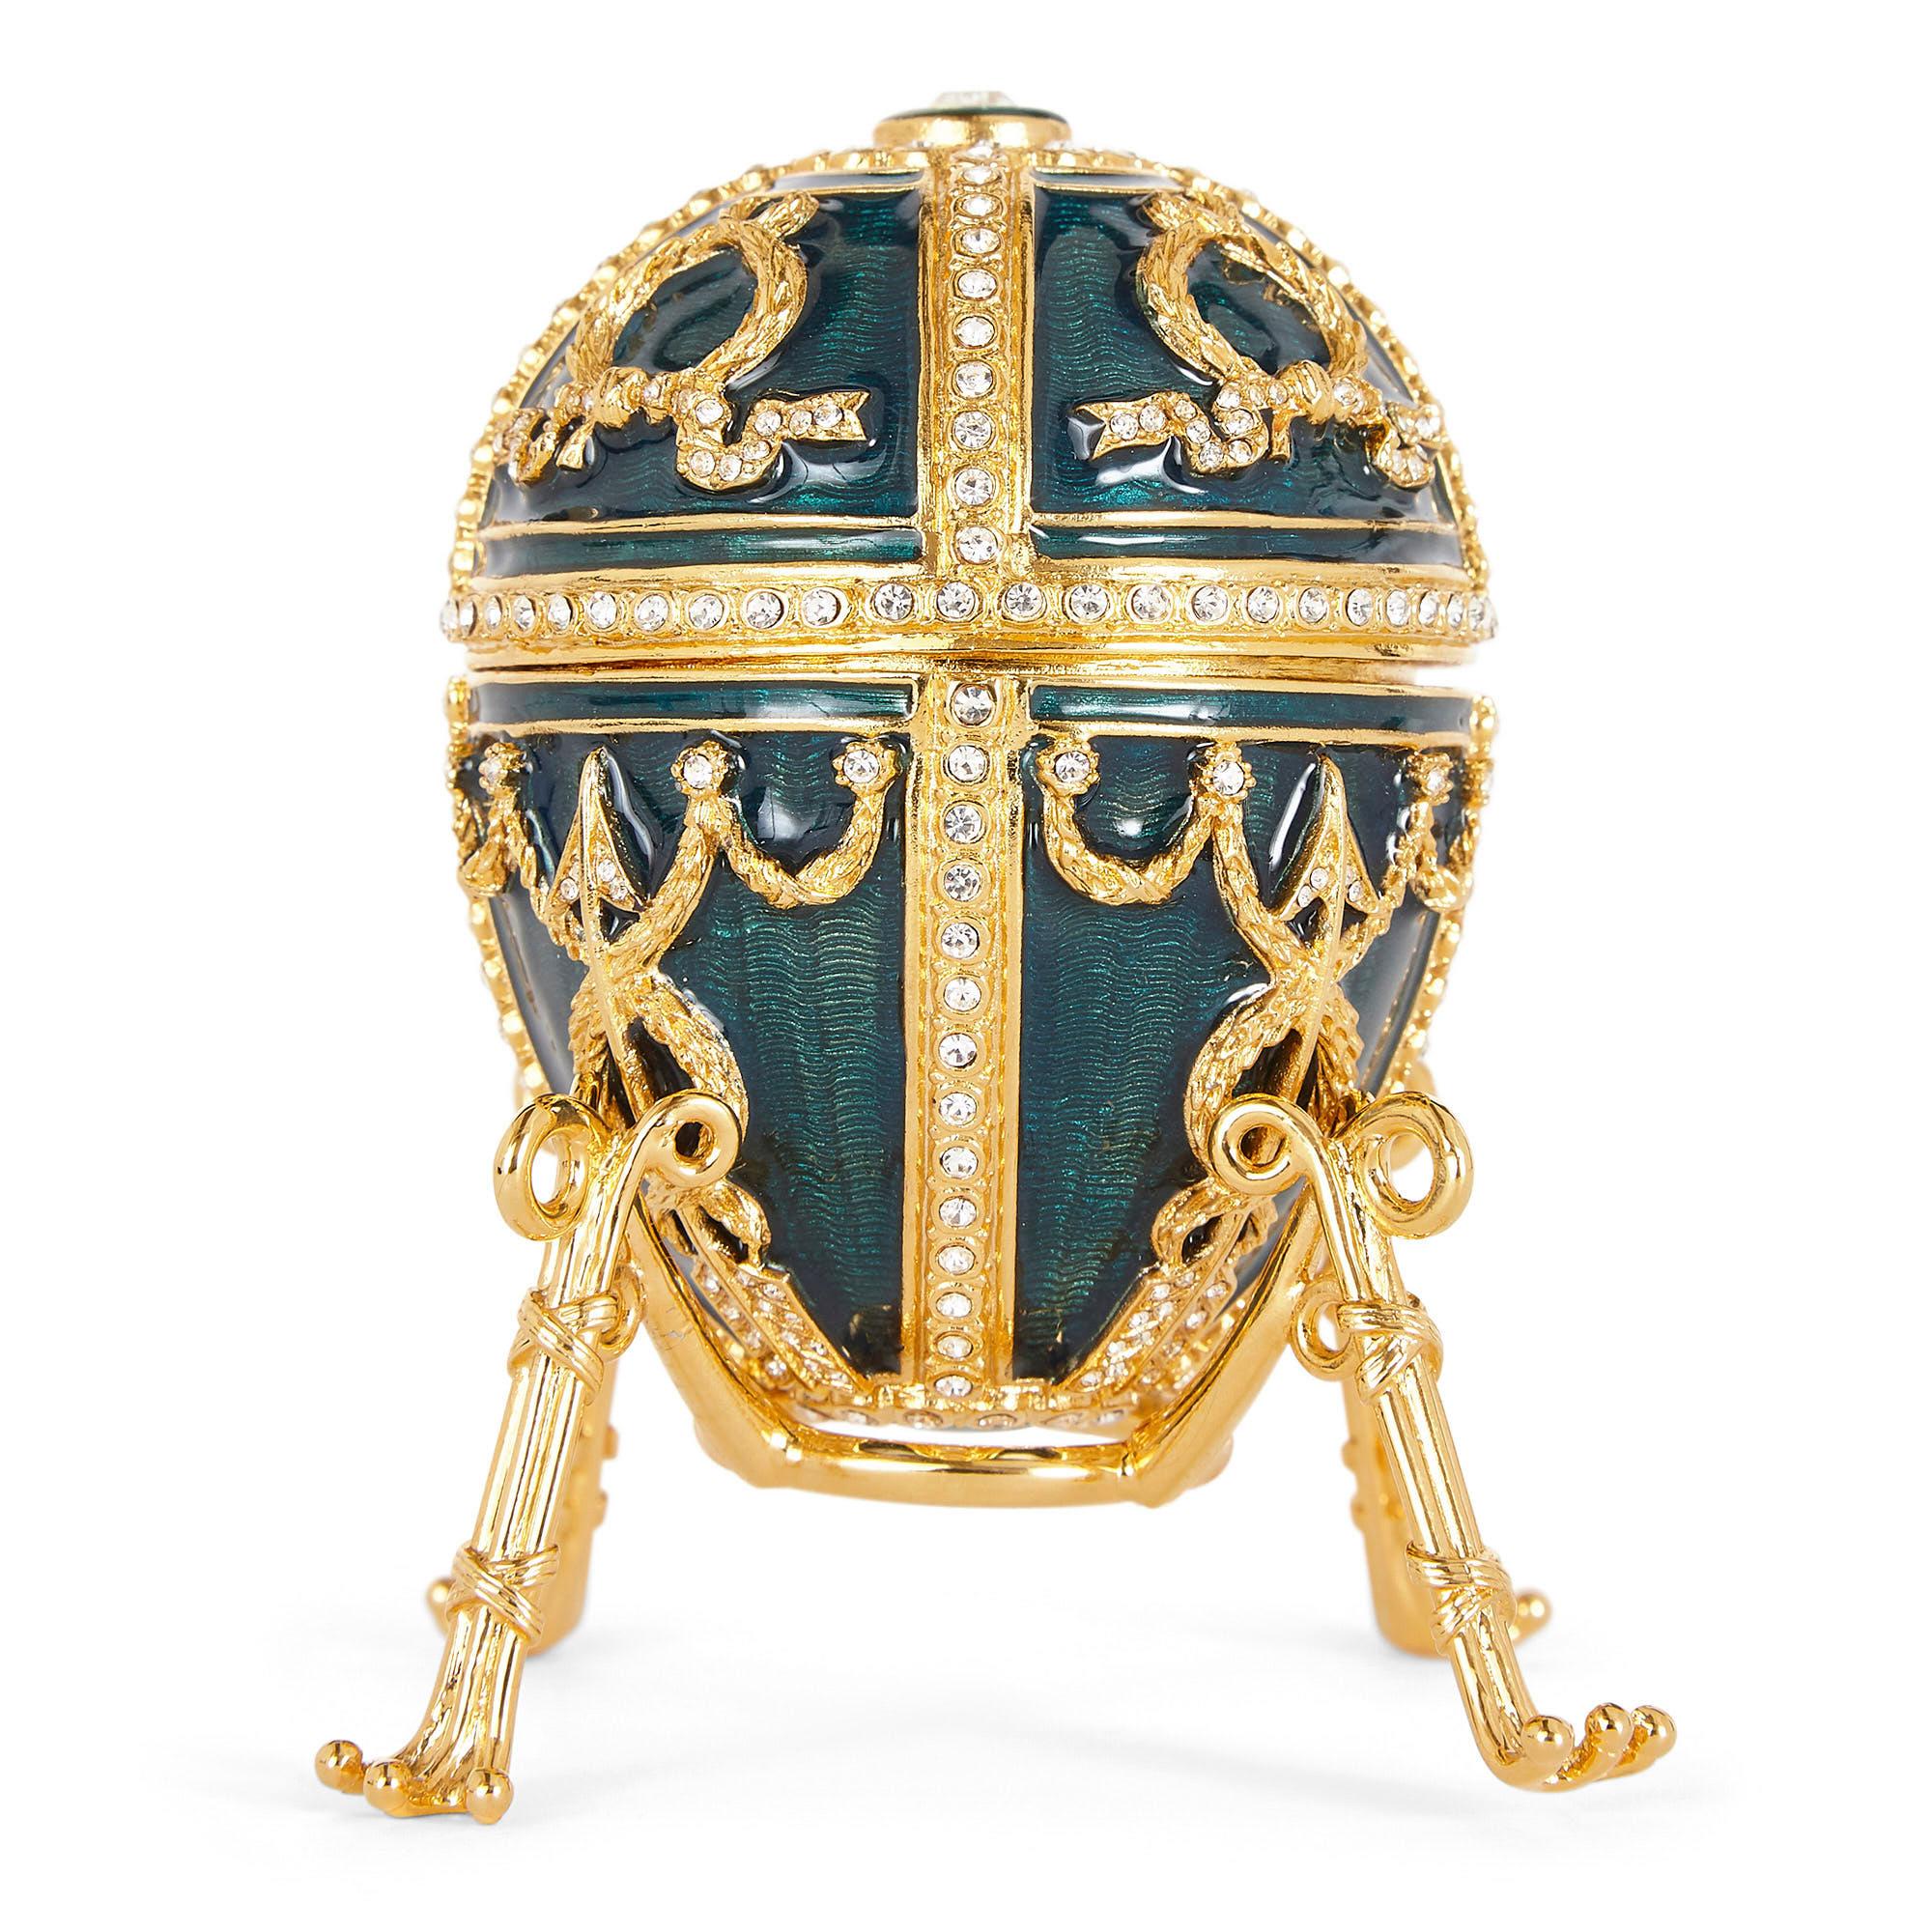 Contemporary Fabergé Easter egg with green Guilloché enamel and gemstones,
Late 20th century
Box: Height 10cm, width 16cm, depth 21cm
Egg on stand: Height 8cm, diameter 6cm

Standing on an elegant four-legged gilt metal stand, this beautiful